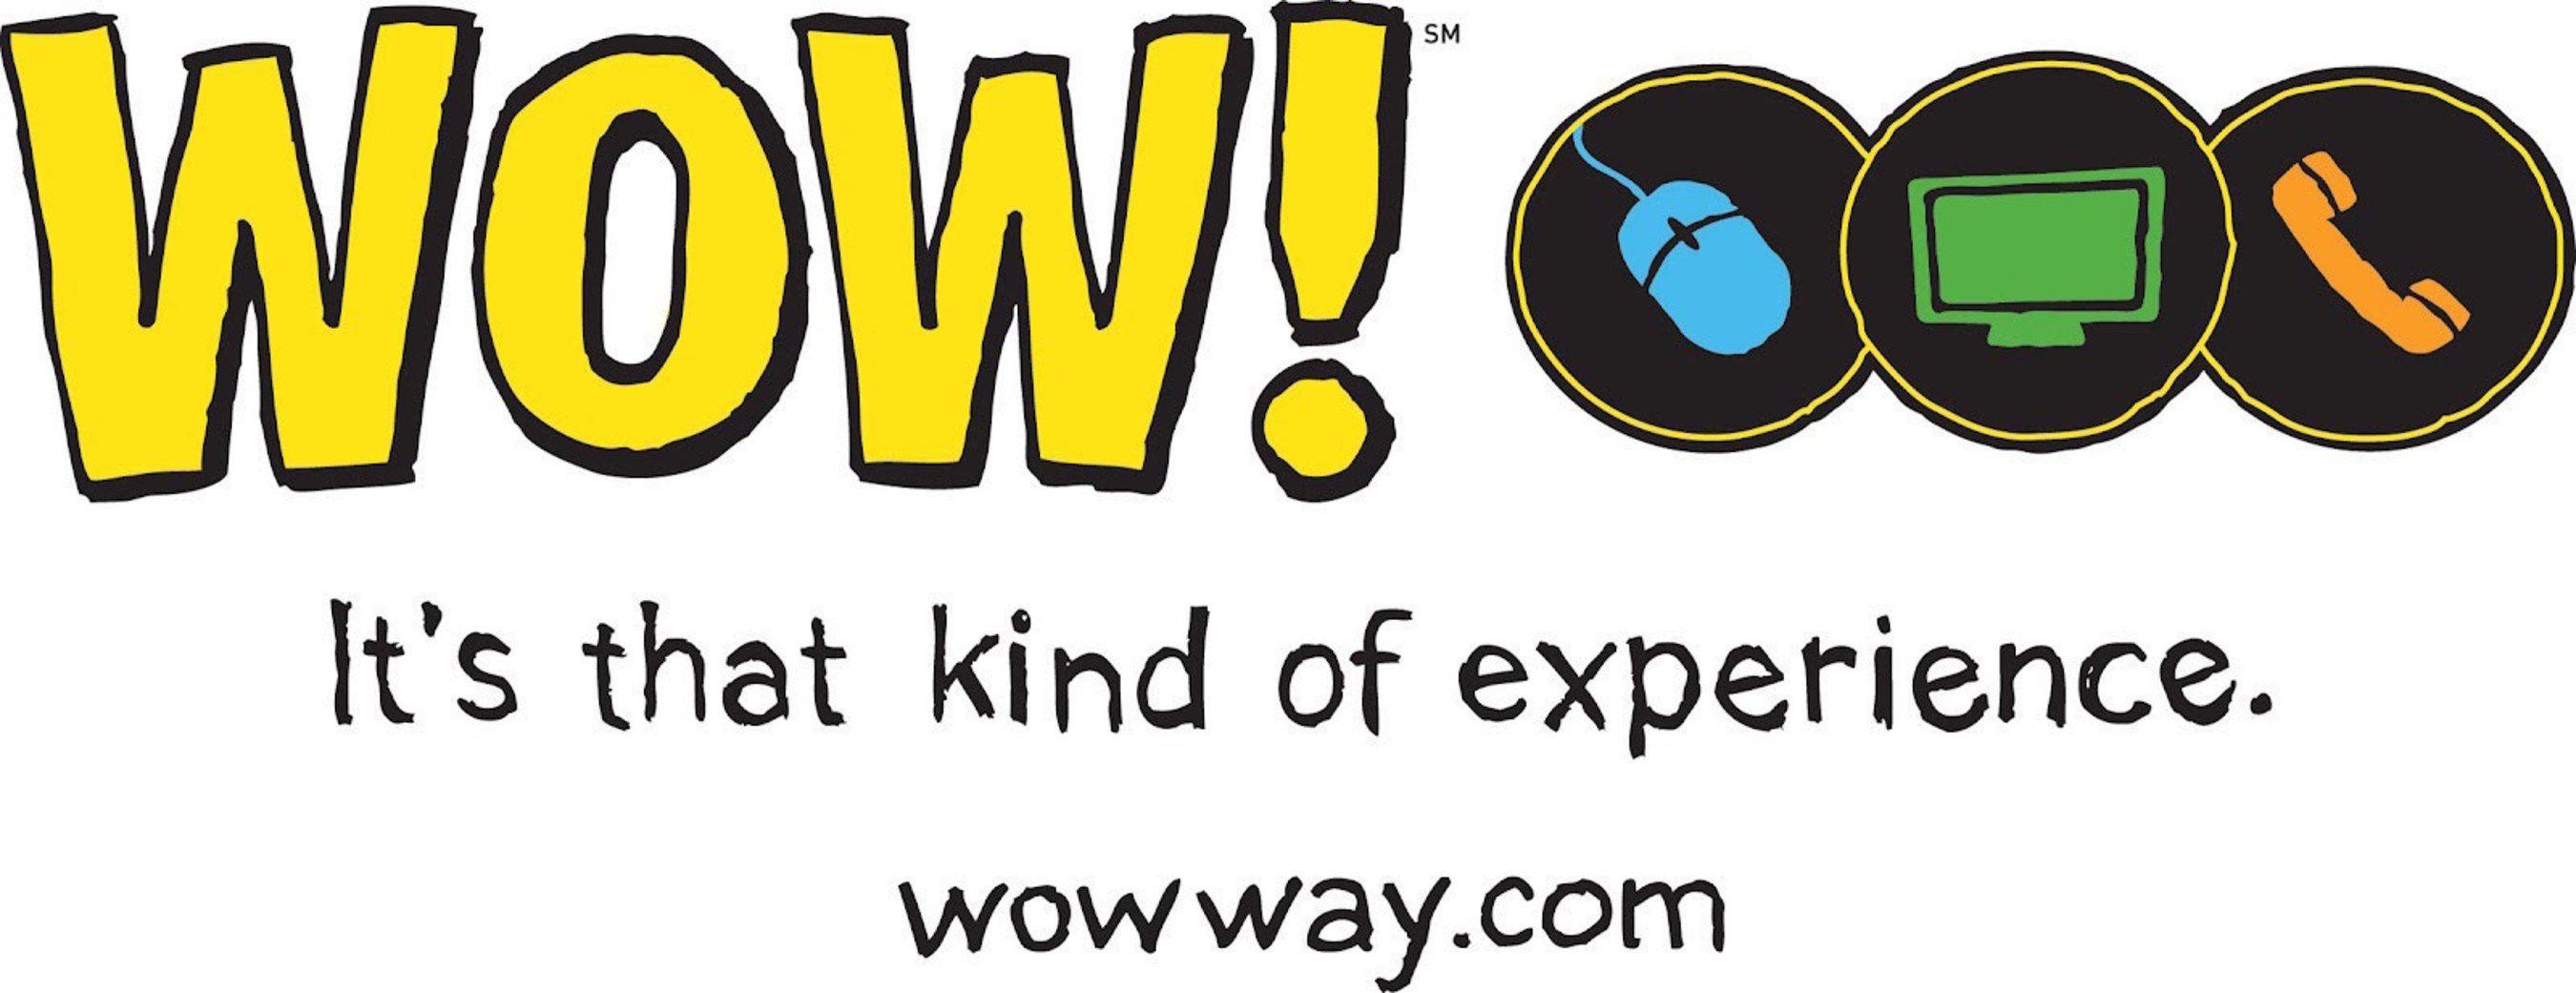 Wowway Logo - WOW! Announces Changes to Executive Team